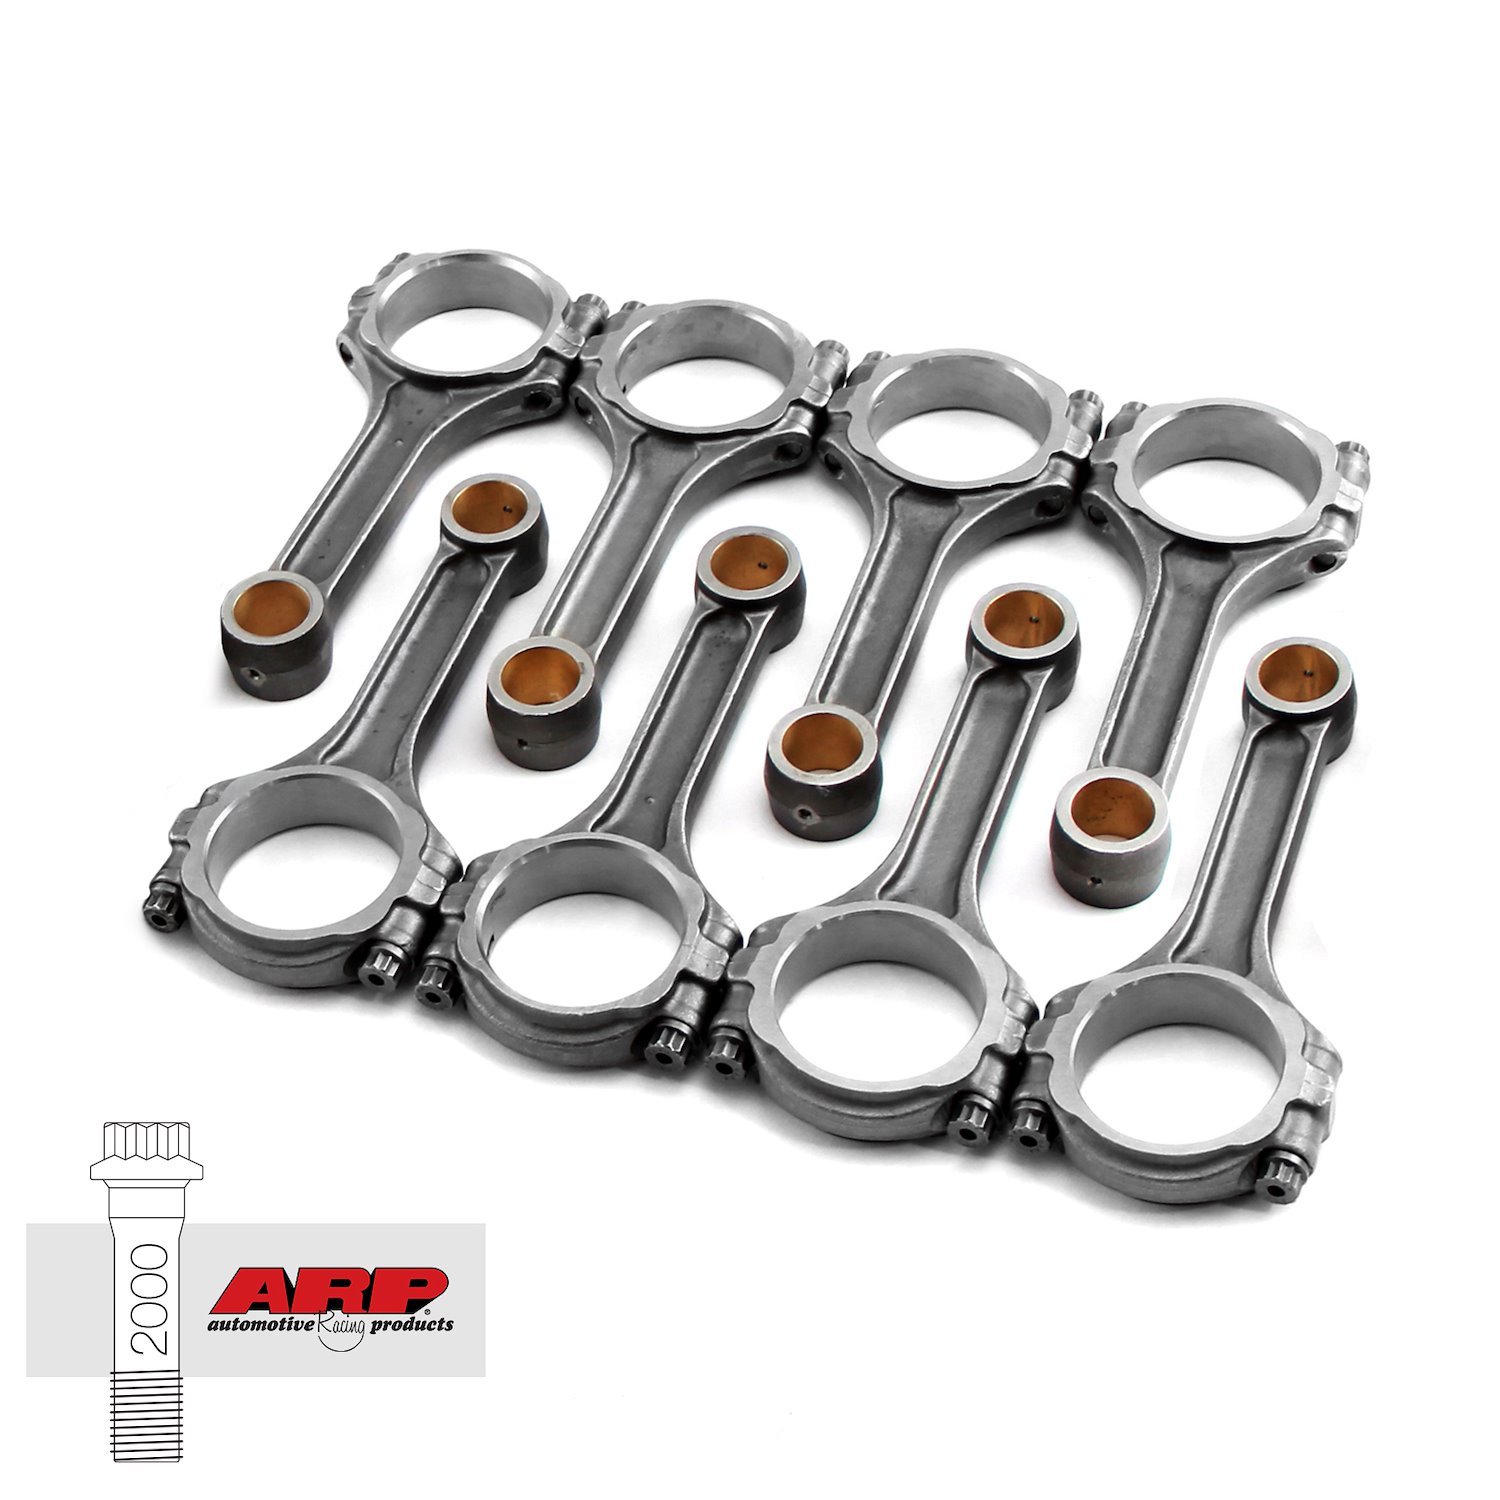 I BEAM 6.200 2.100 .927 5140 CONNECTING RODS